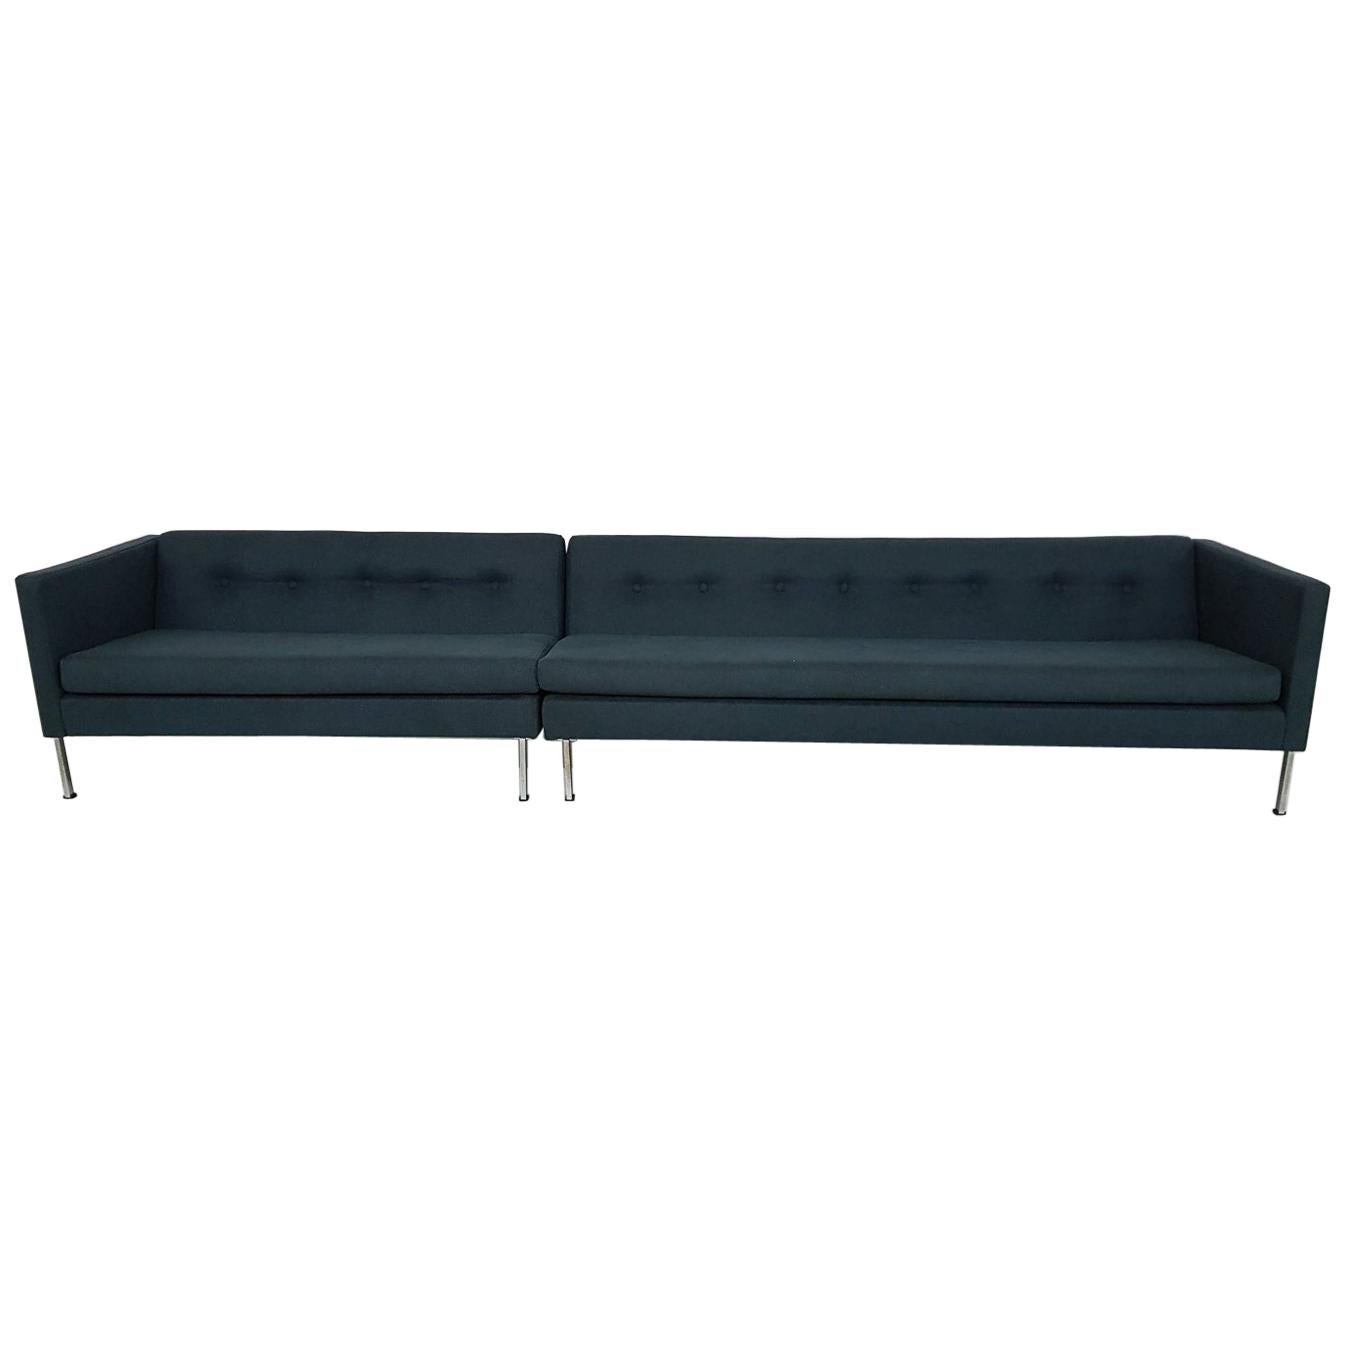 Kho Liang Ie for Artifort Model 680-686 Sofa with Corner Table, Dutch Modern 60s